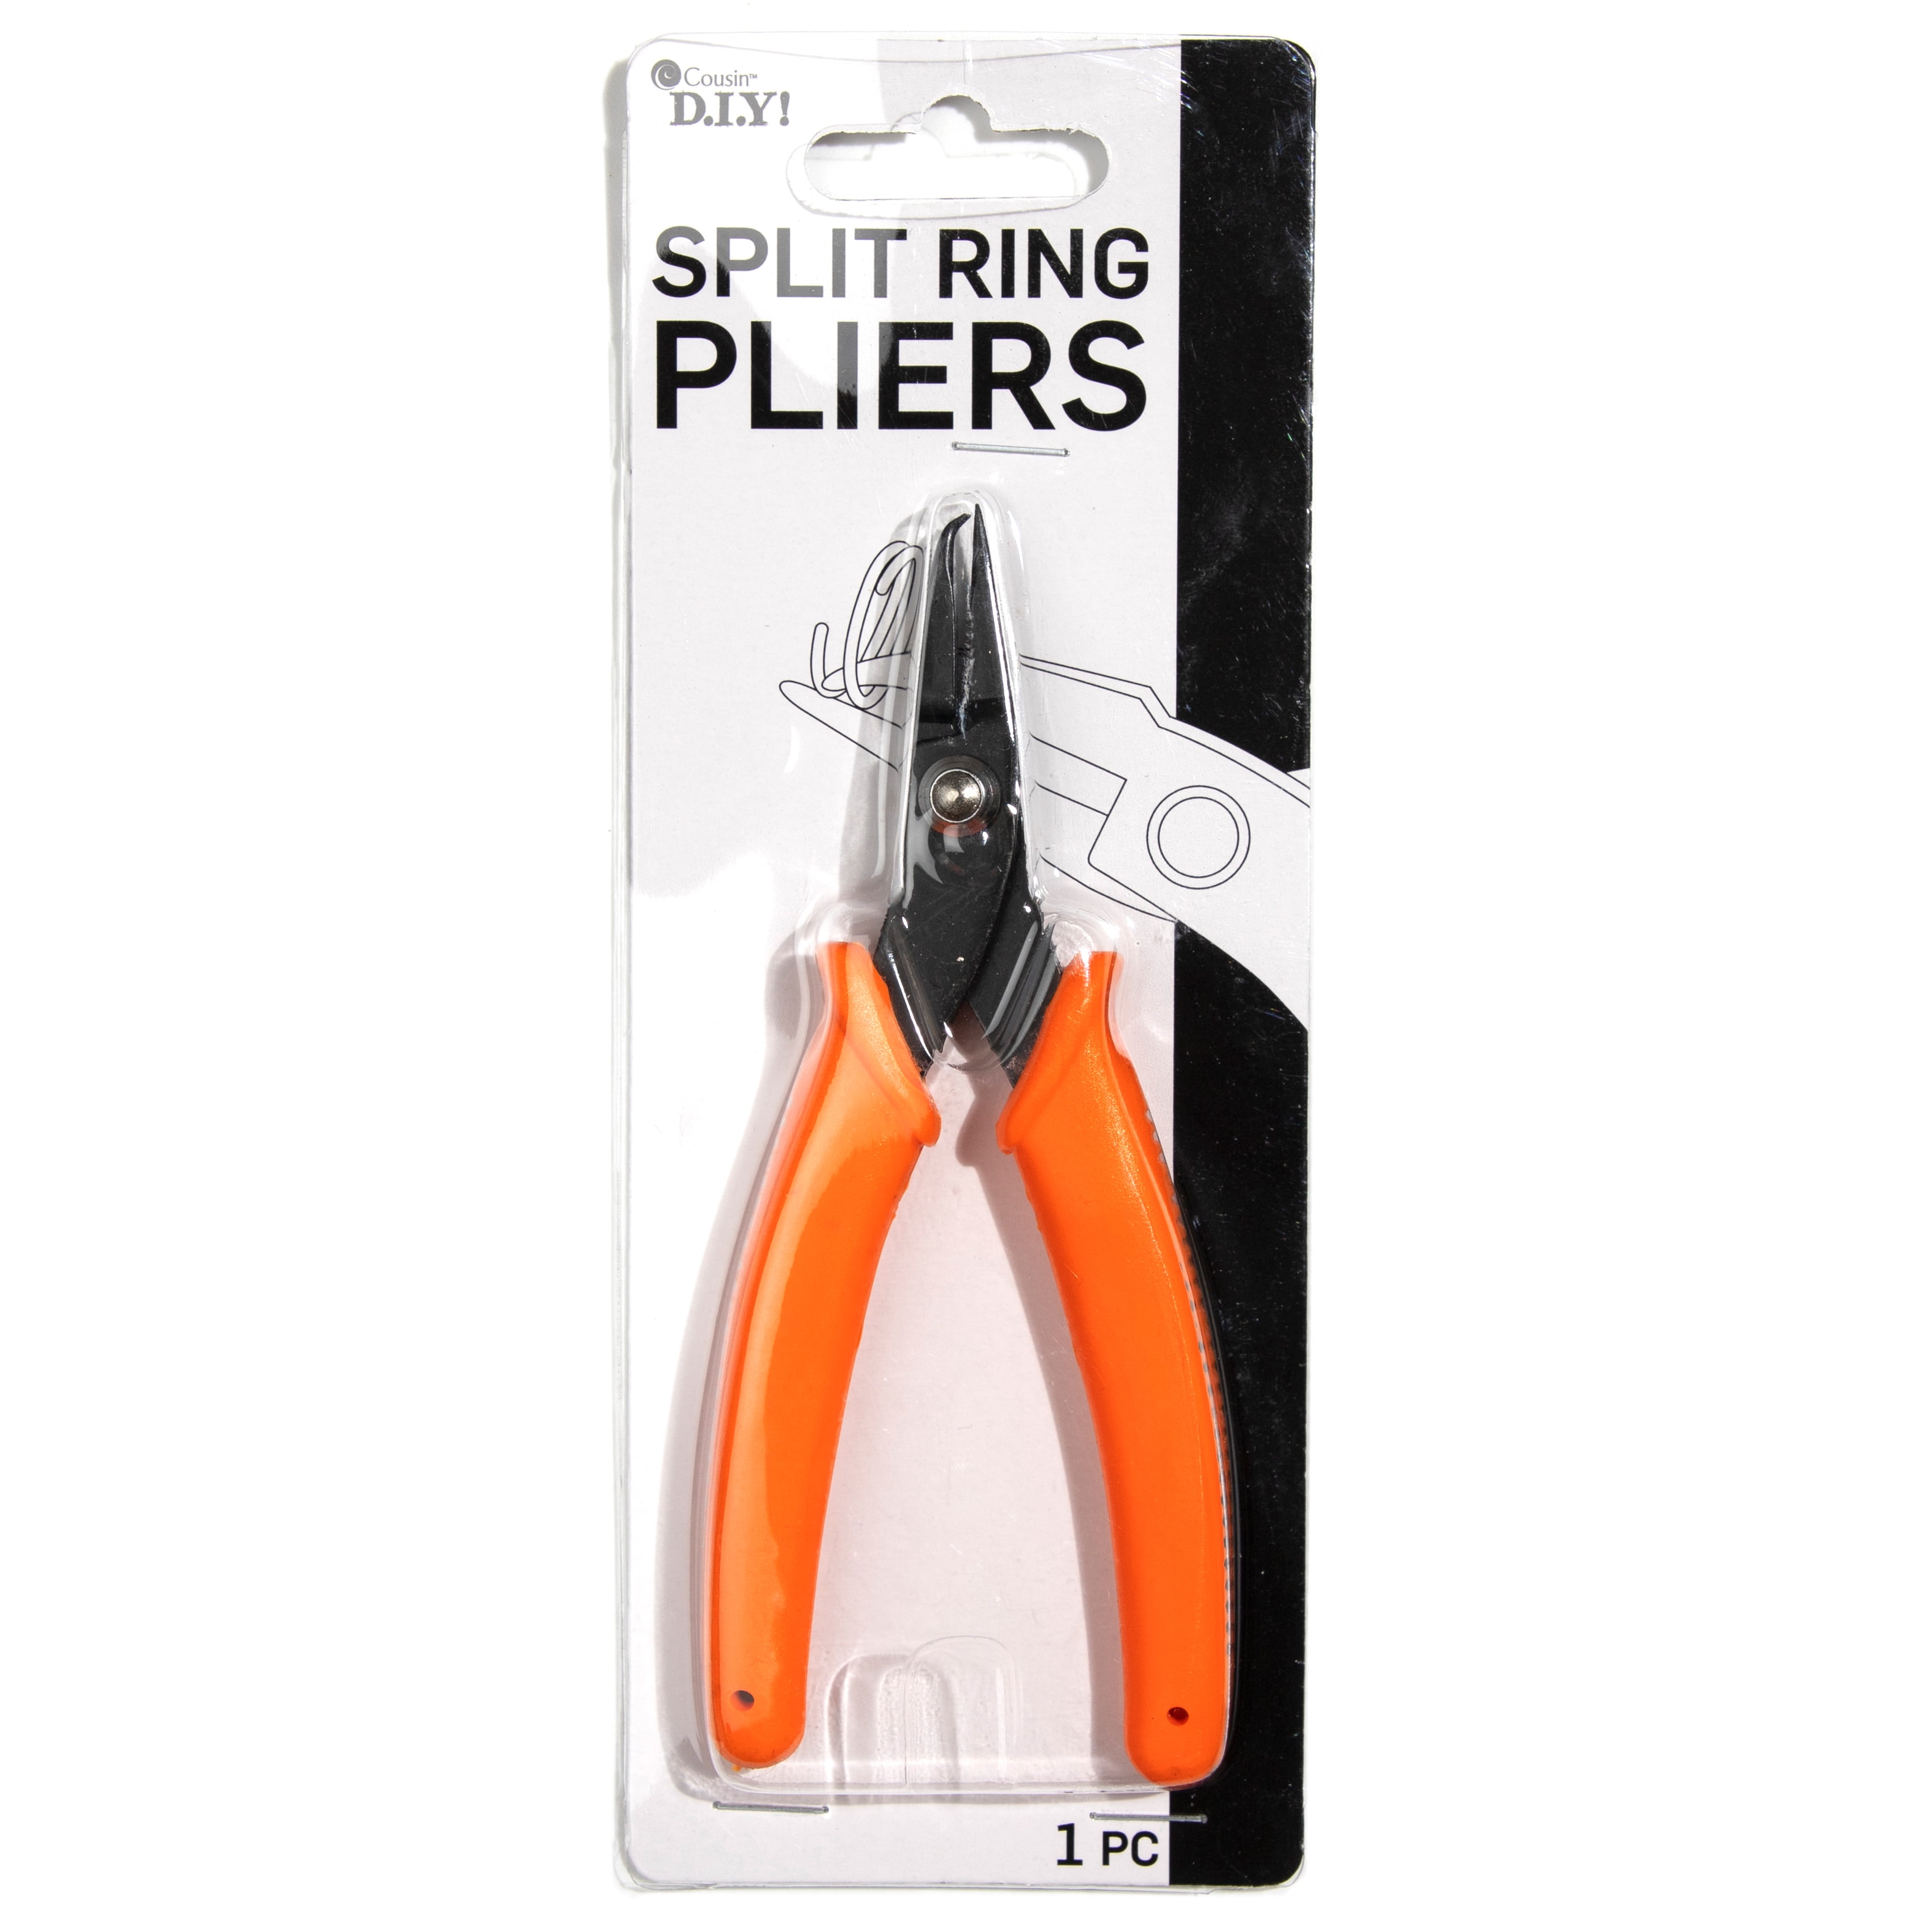 2 pieces split ring pliers crimping pliers jewelry jump ring